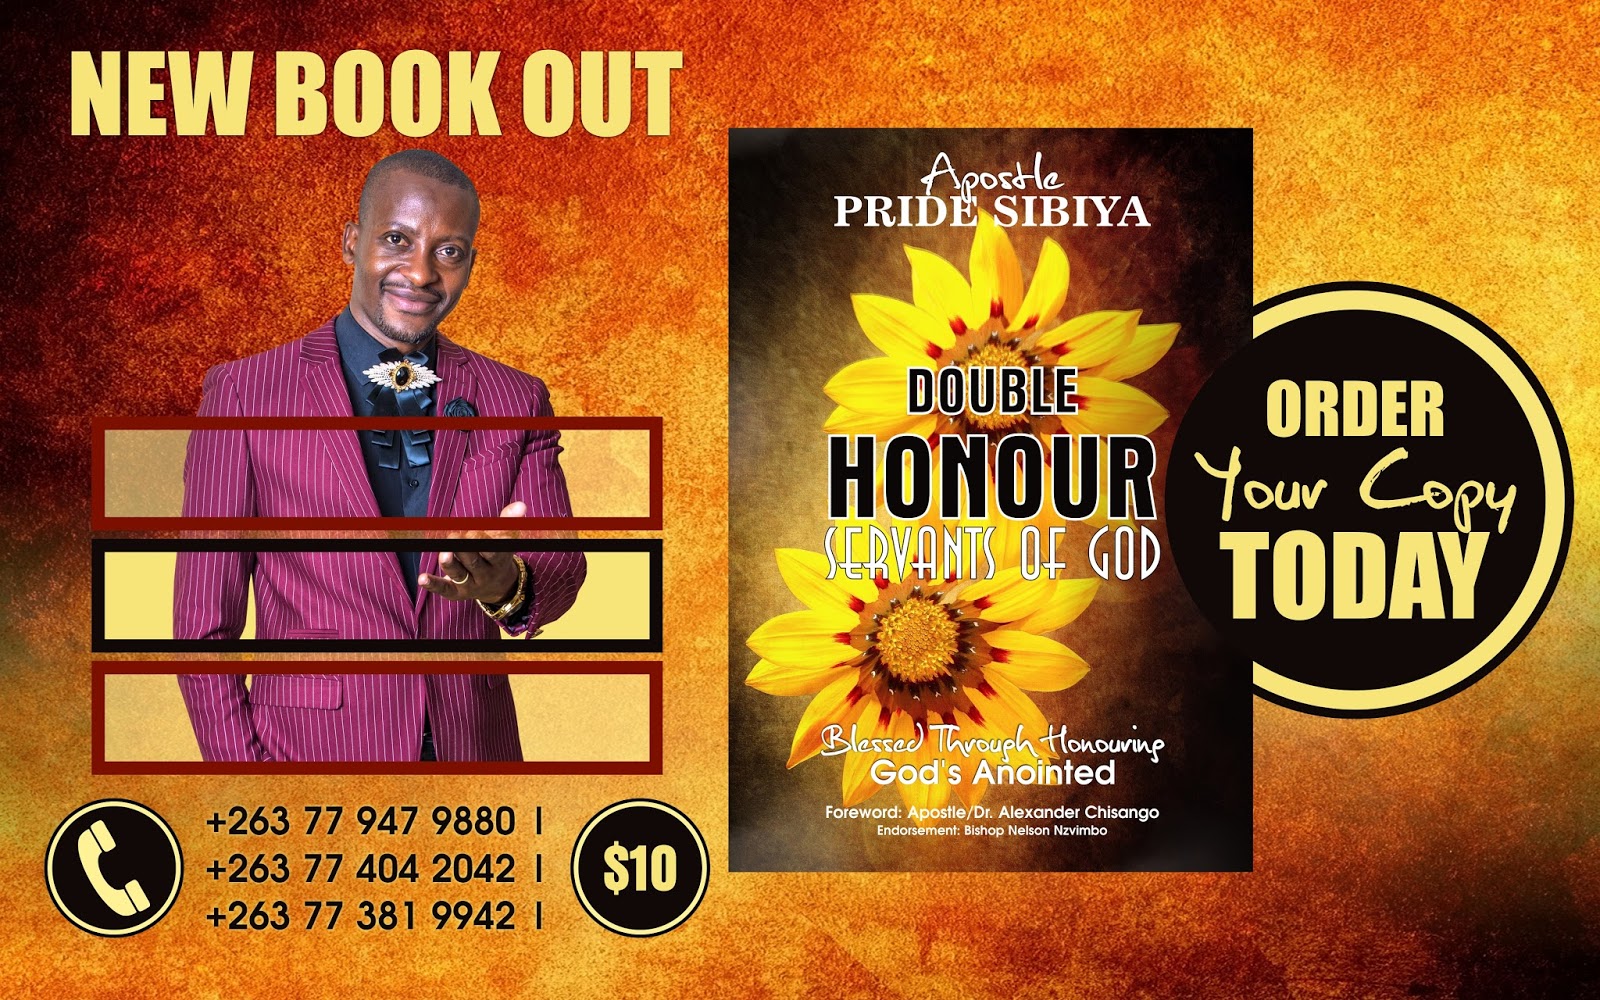 Extract From Book Double Honour By Apostle Pride Sibiya